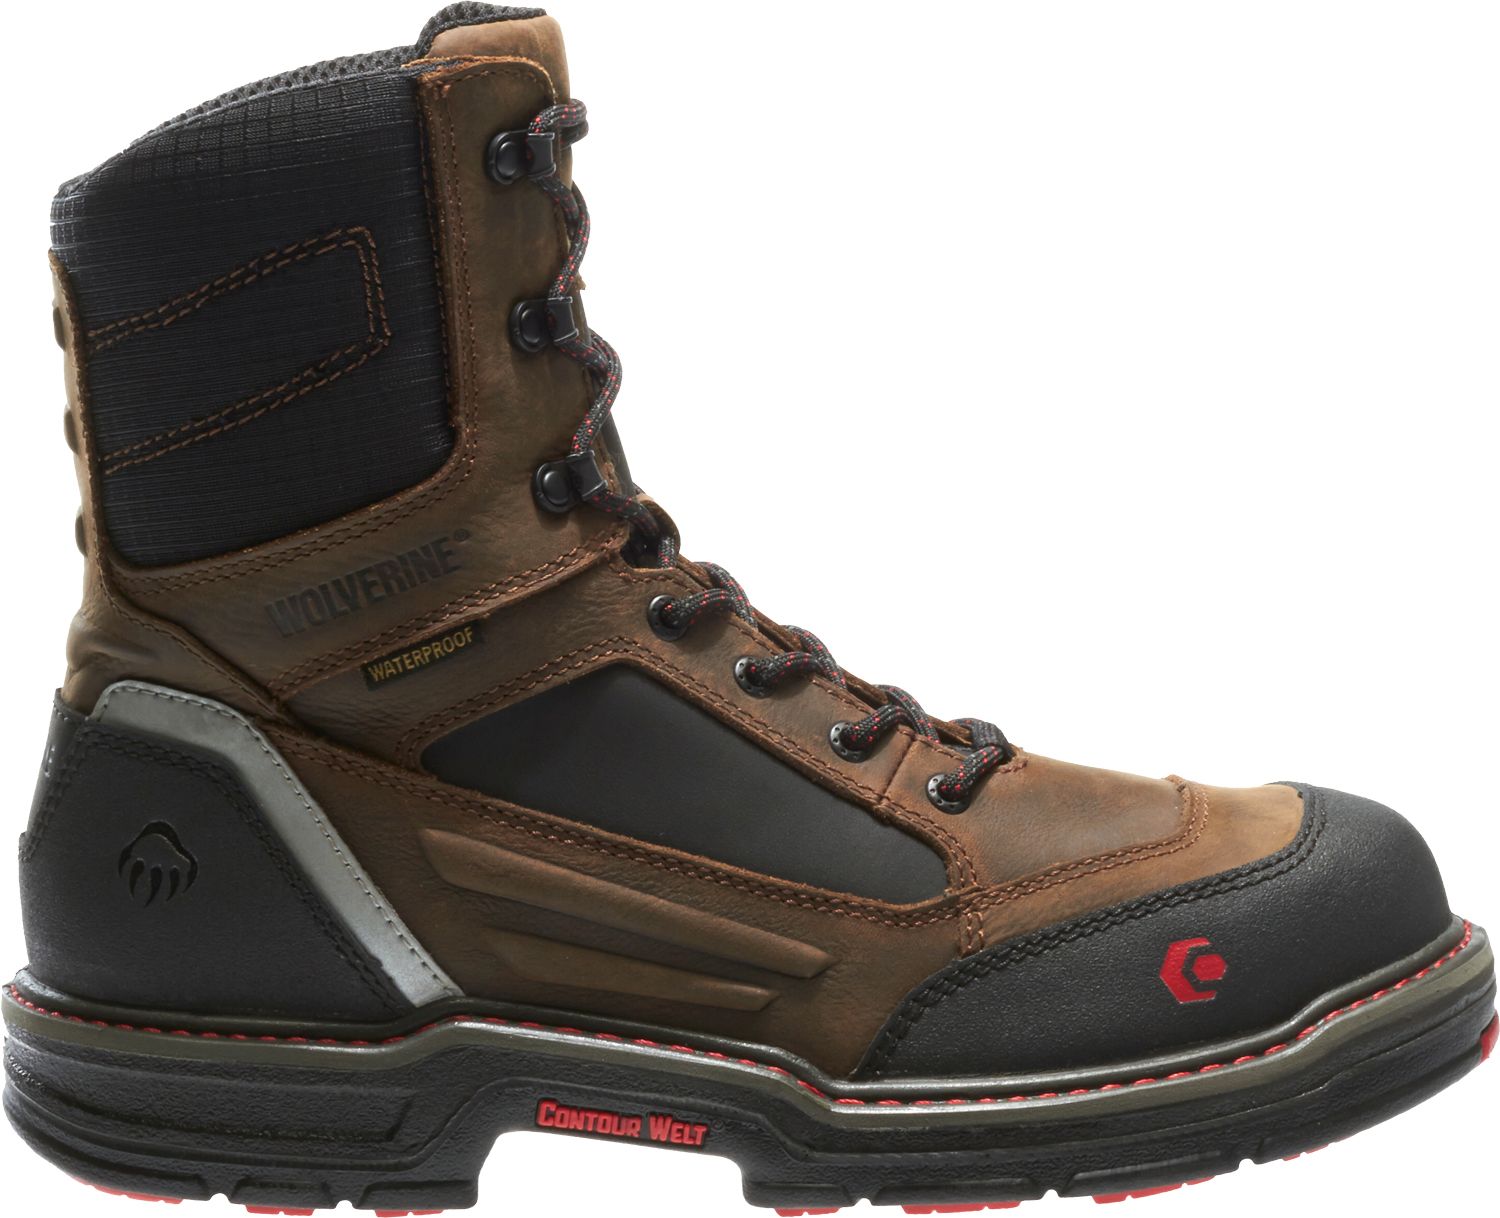 carbonmax boots